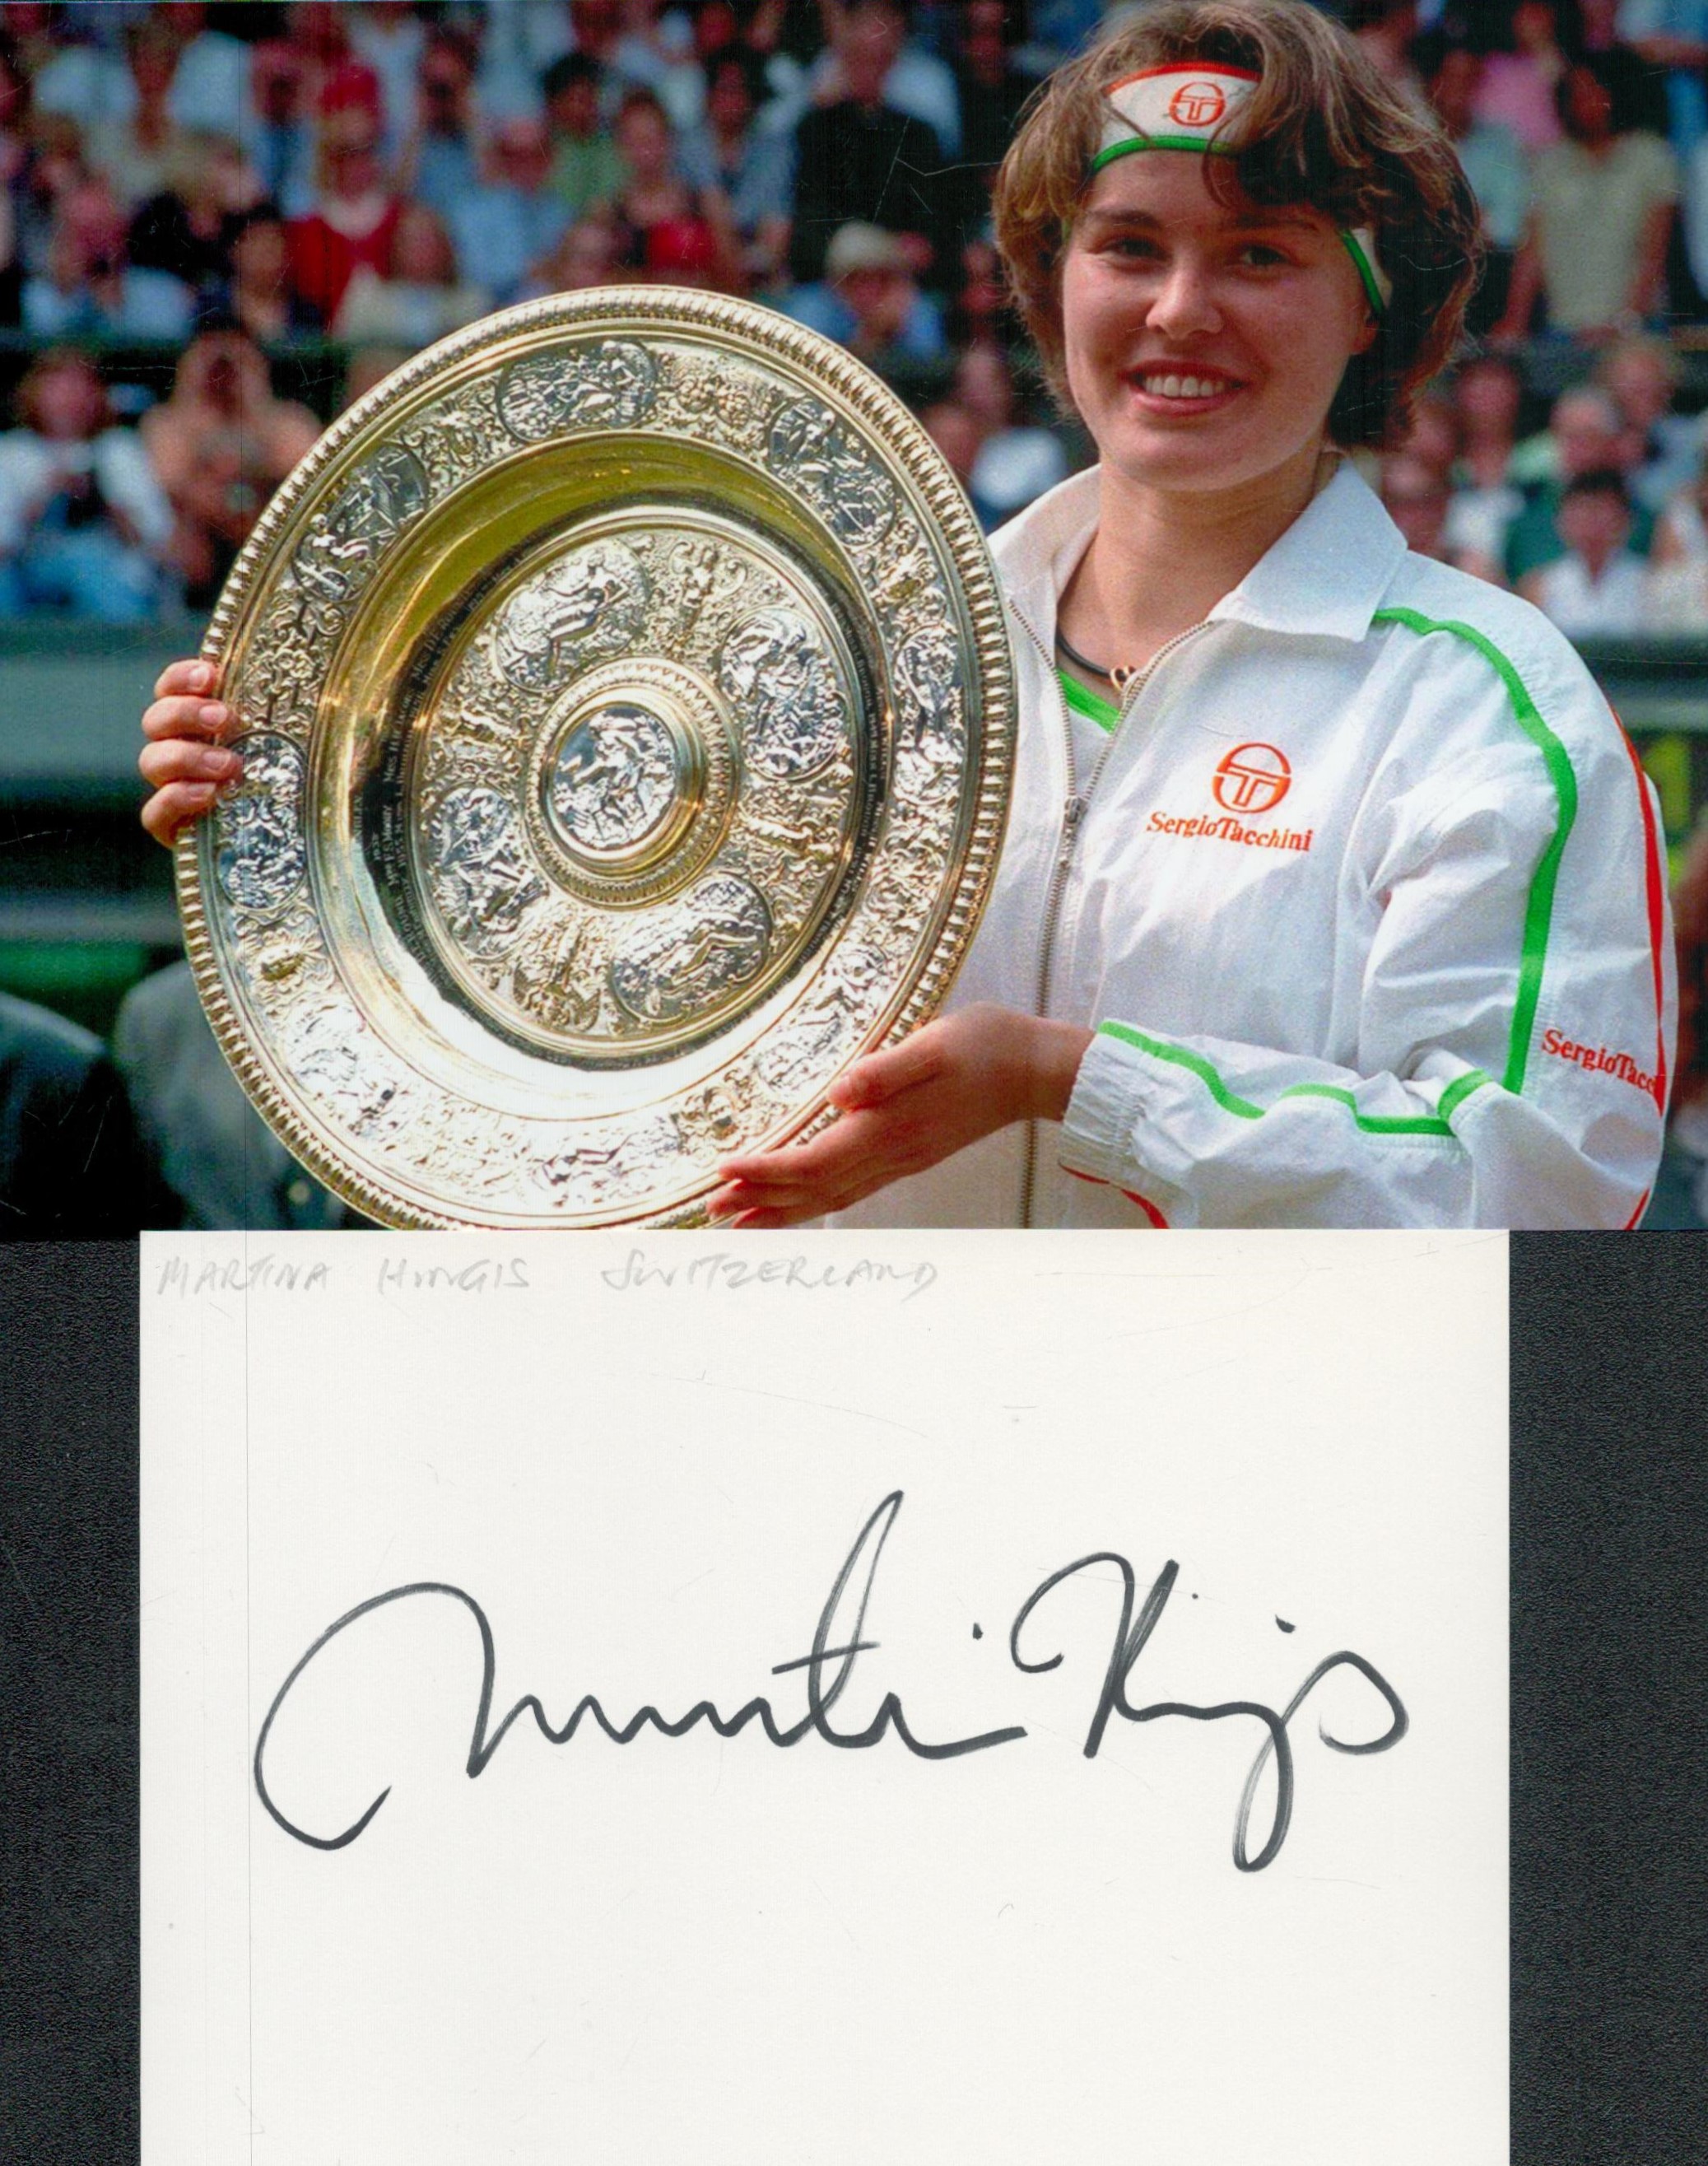 MARTINA HINGIS Tennis Legend signed card with 1999 Wimbledon Open Photo . Good Condition. All